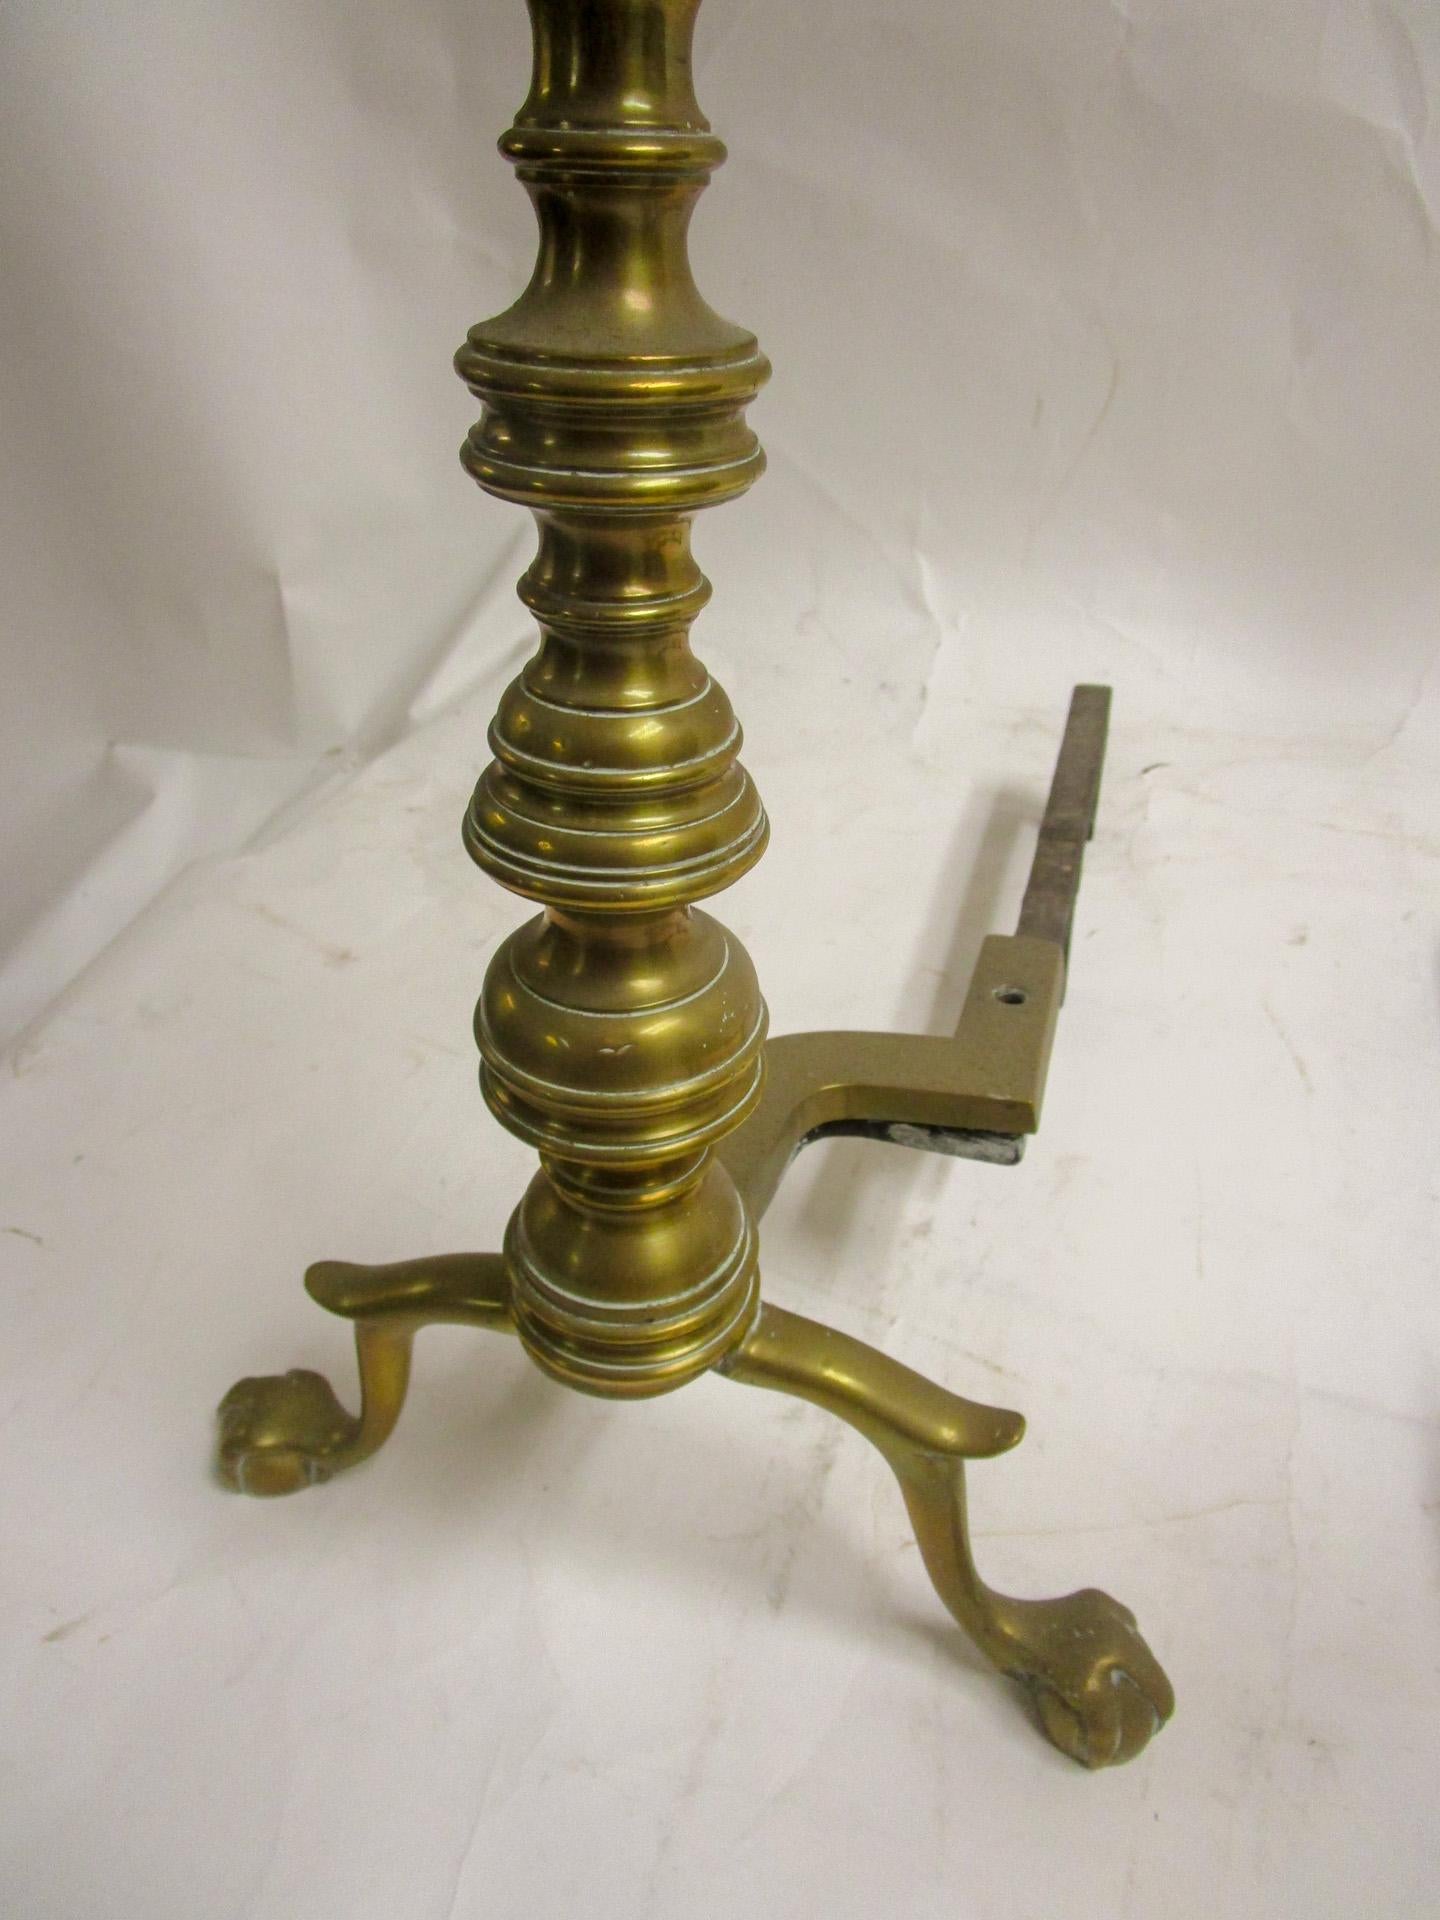 Late Victorian 19th c Victorian English Brass Andiron Firedog Pair with Ball and Claw Feet